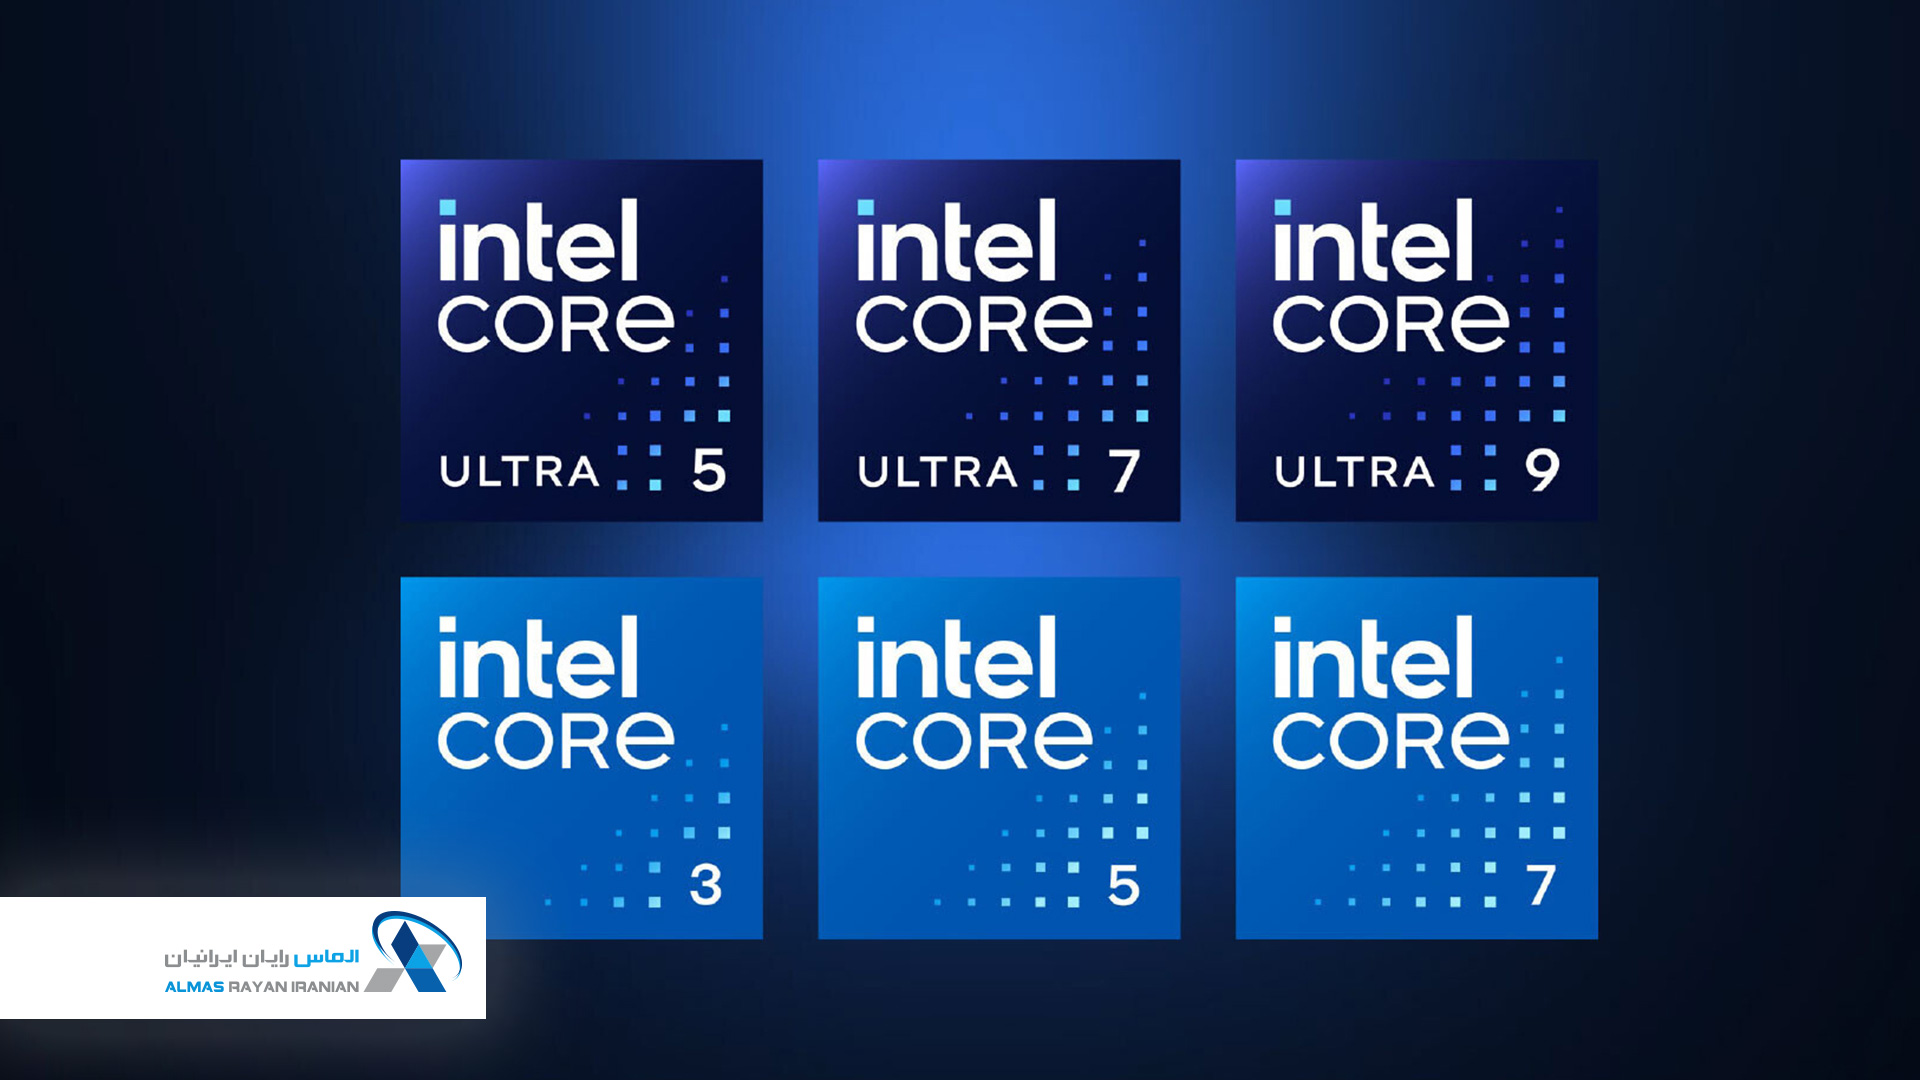 Intel-drops-the-‘i’,-new-branding-for-upcoming-Meteor-Lake-CPUs-confirmed